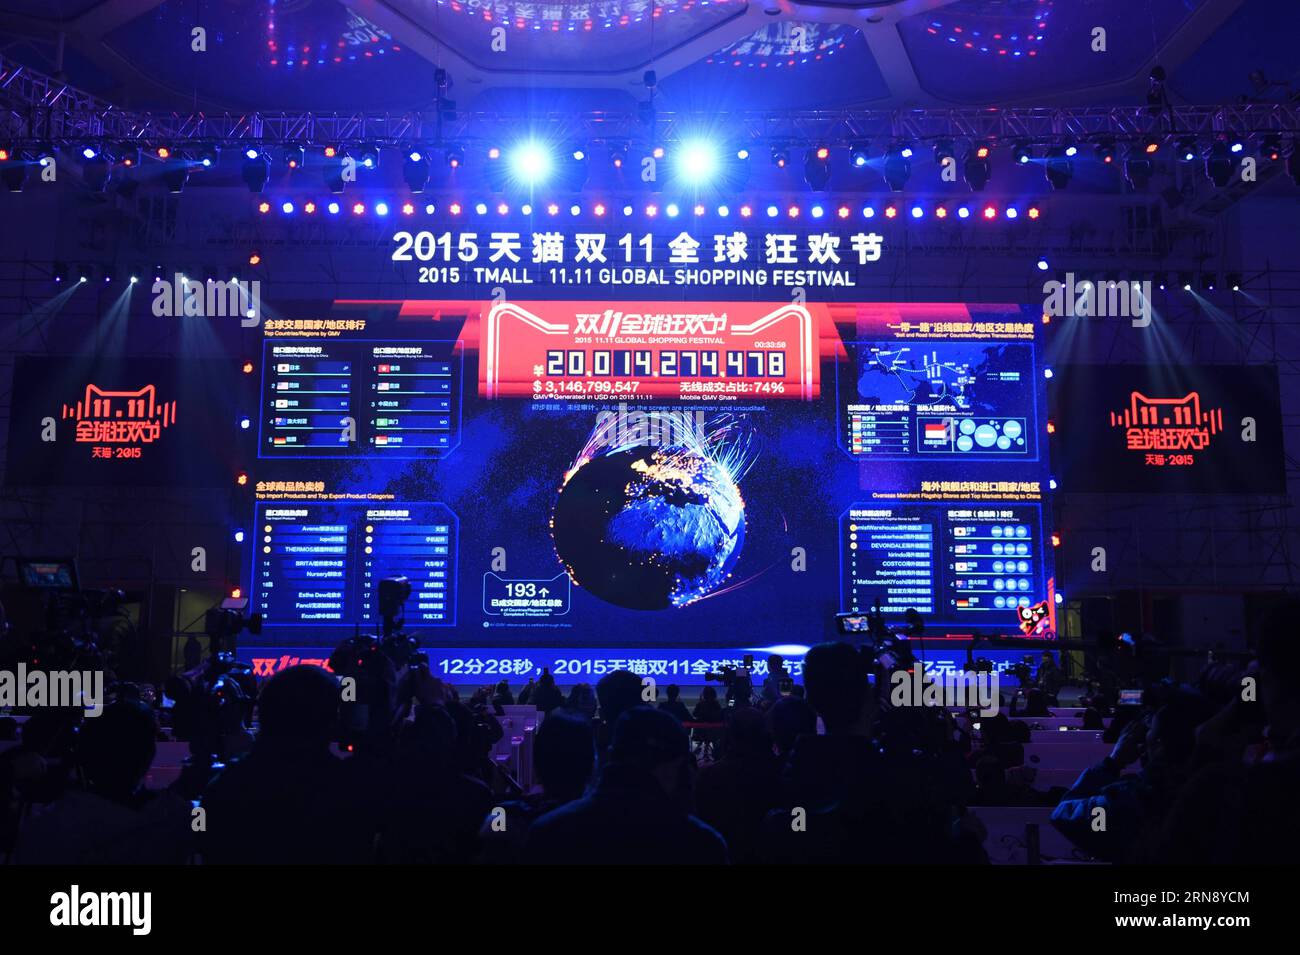 BEIJING, Nov. 11, 2015 -- An electronic screen shows that the transaction volume of Tmall topping 20 billion yuan (about 3.2 billion dollars) in the first 34 minutes of the Singles Day at the National Aquatics Center in Beijing, capital of China, Nov. 11, 2015.The transaction volume of Tmall,a business-to-consumer marketplace of China s biggest e-commerce platform Alibaba,topped 10 billion yuan (about 1.6 billion dollars) in the first 13 minutes of the Singles Day which fell on Wednesday, setting a new record for its past marks, and its transaction volume in 4.5 hours passed its all-day volume Stock Photo